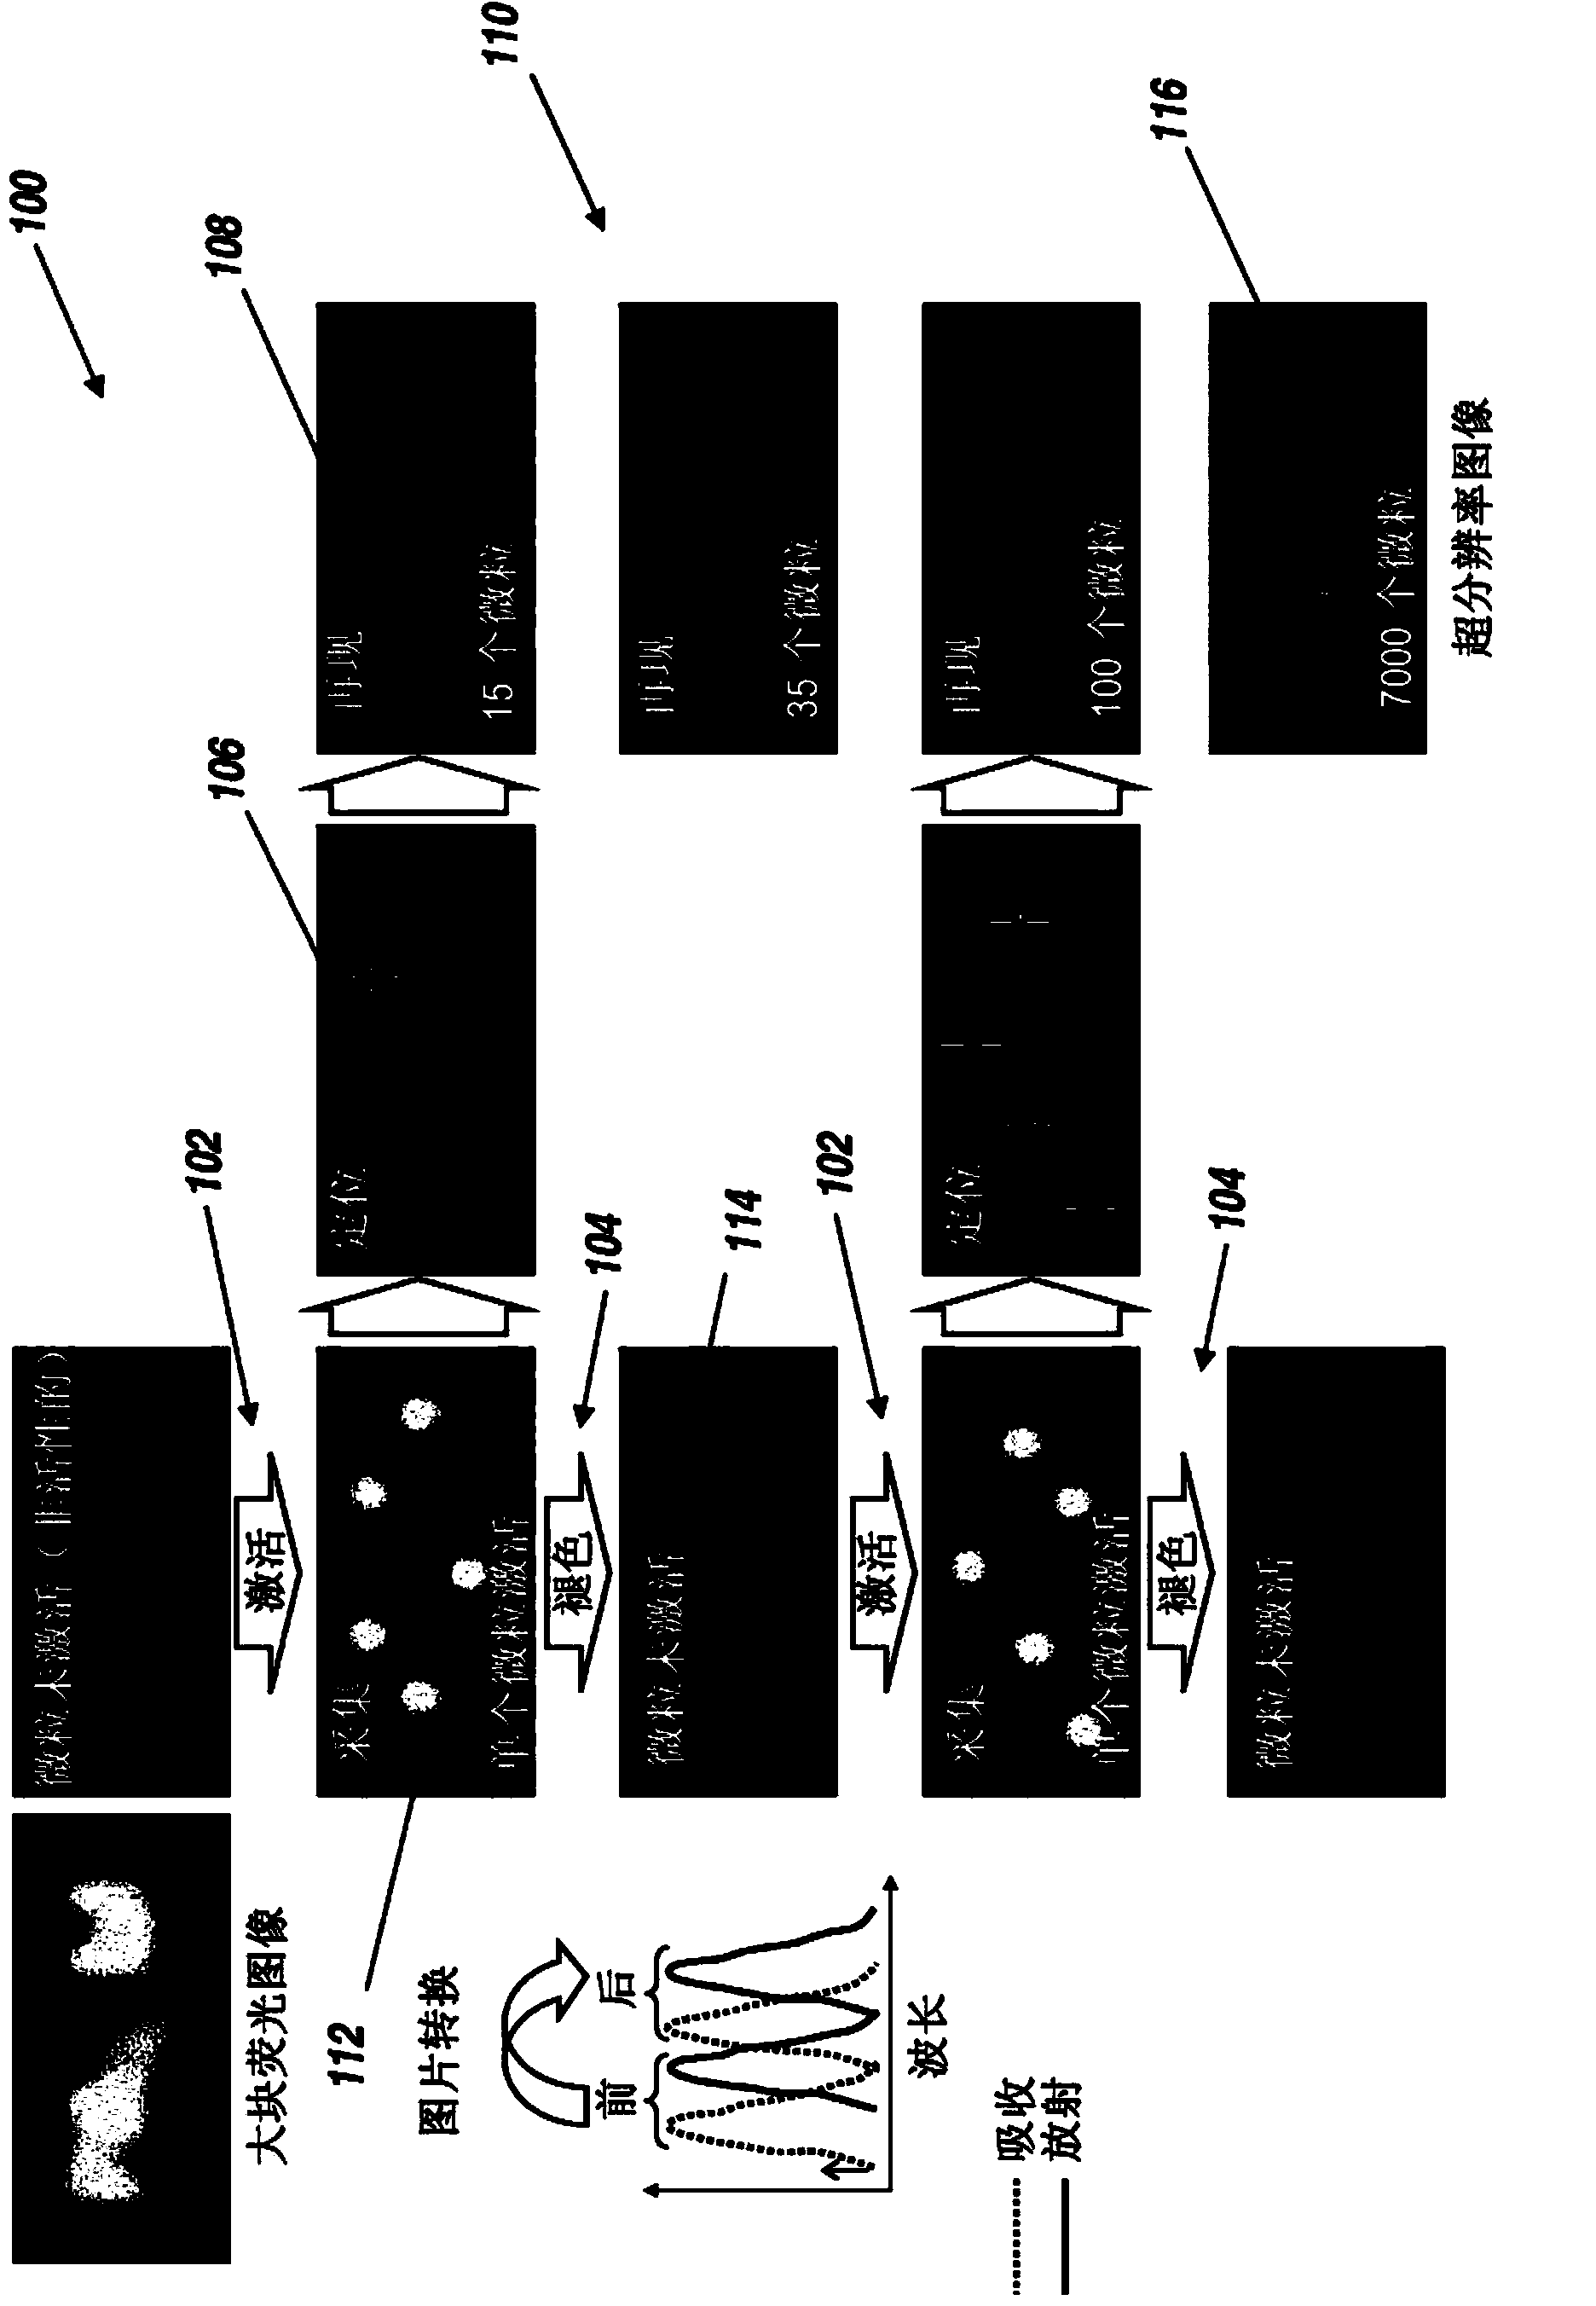 Method and apparatus for single-particle localization using wavelet analysis